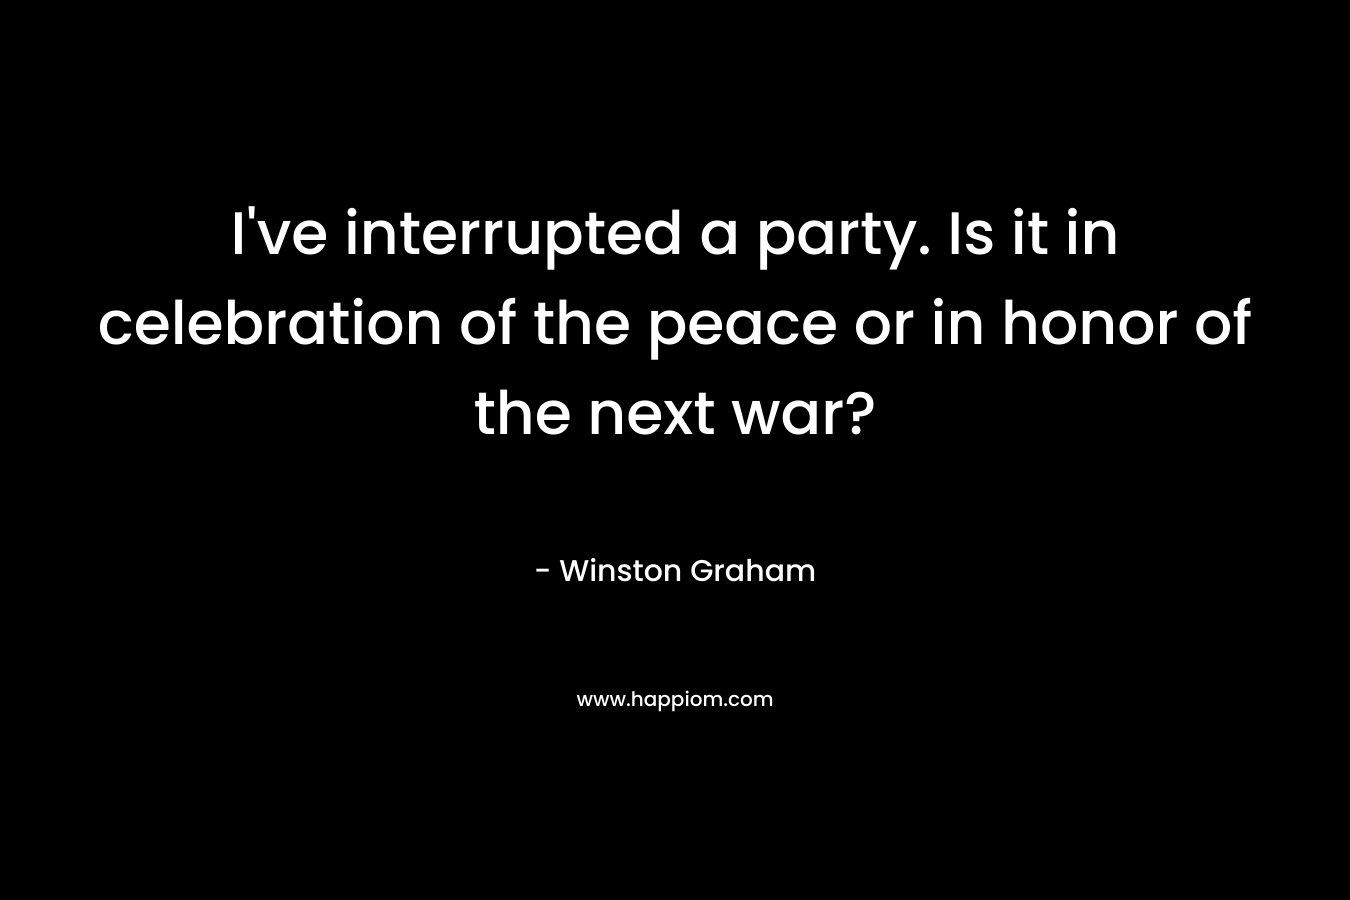 I’ve interrupted a party. Is it in celebration of the peace or in honor of the next war? – Winston Graham